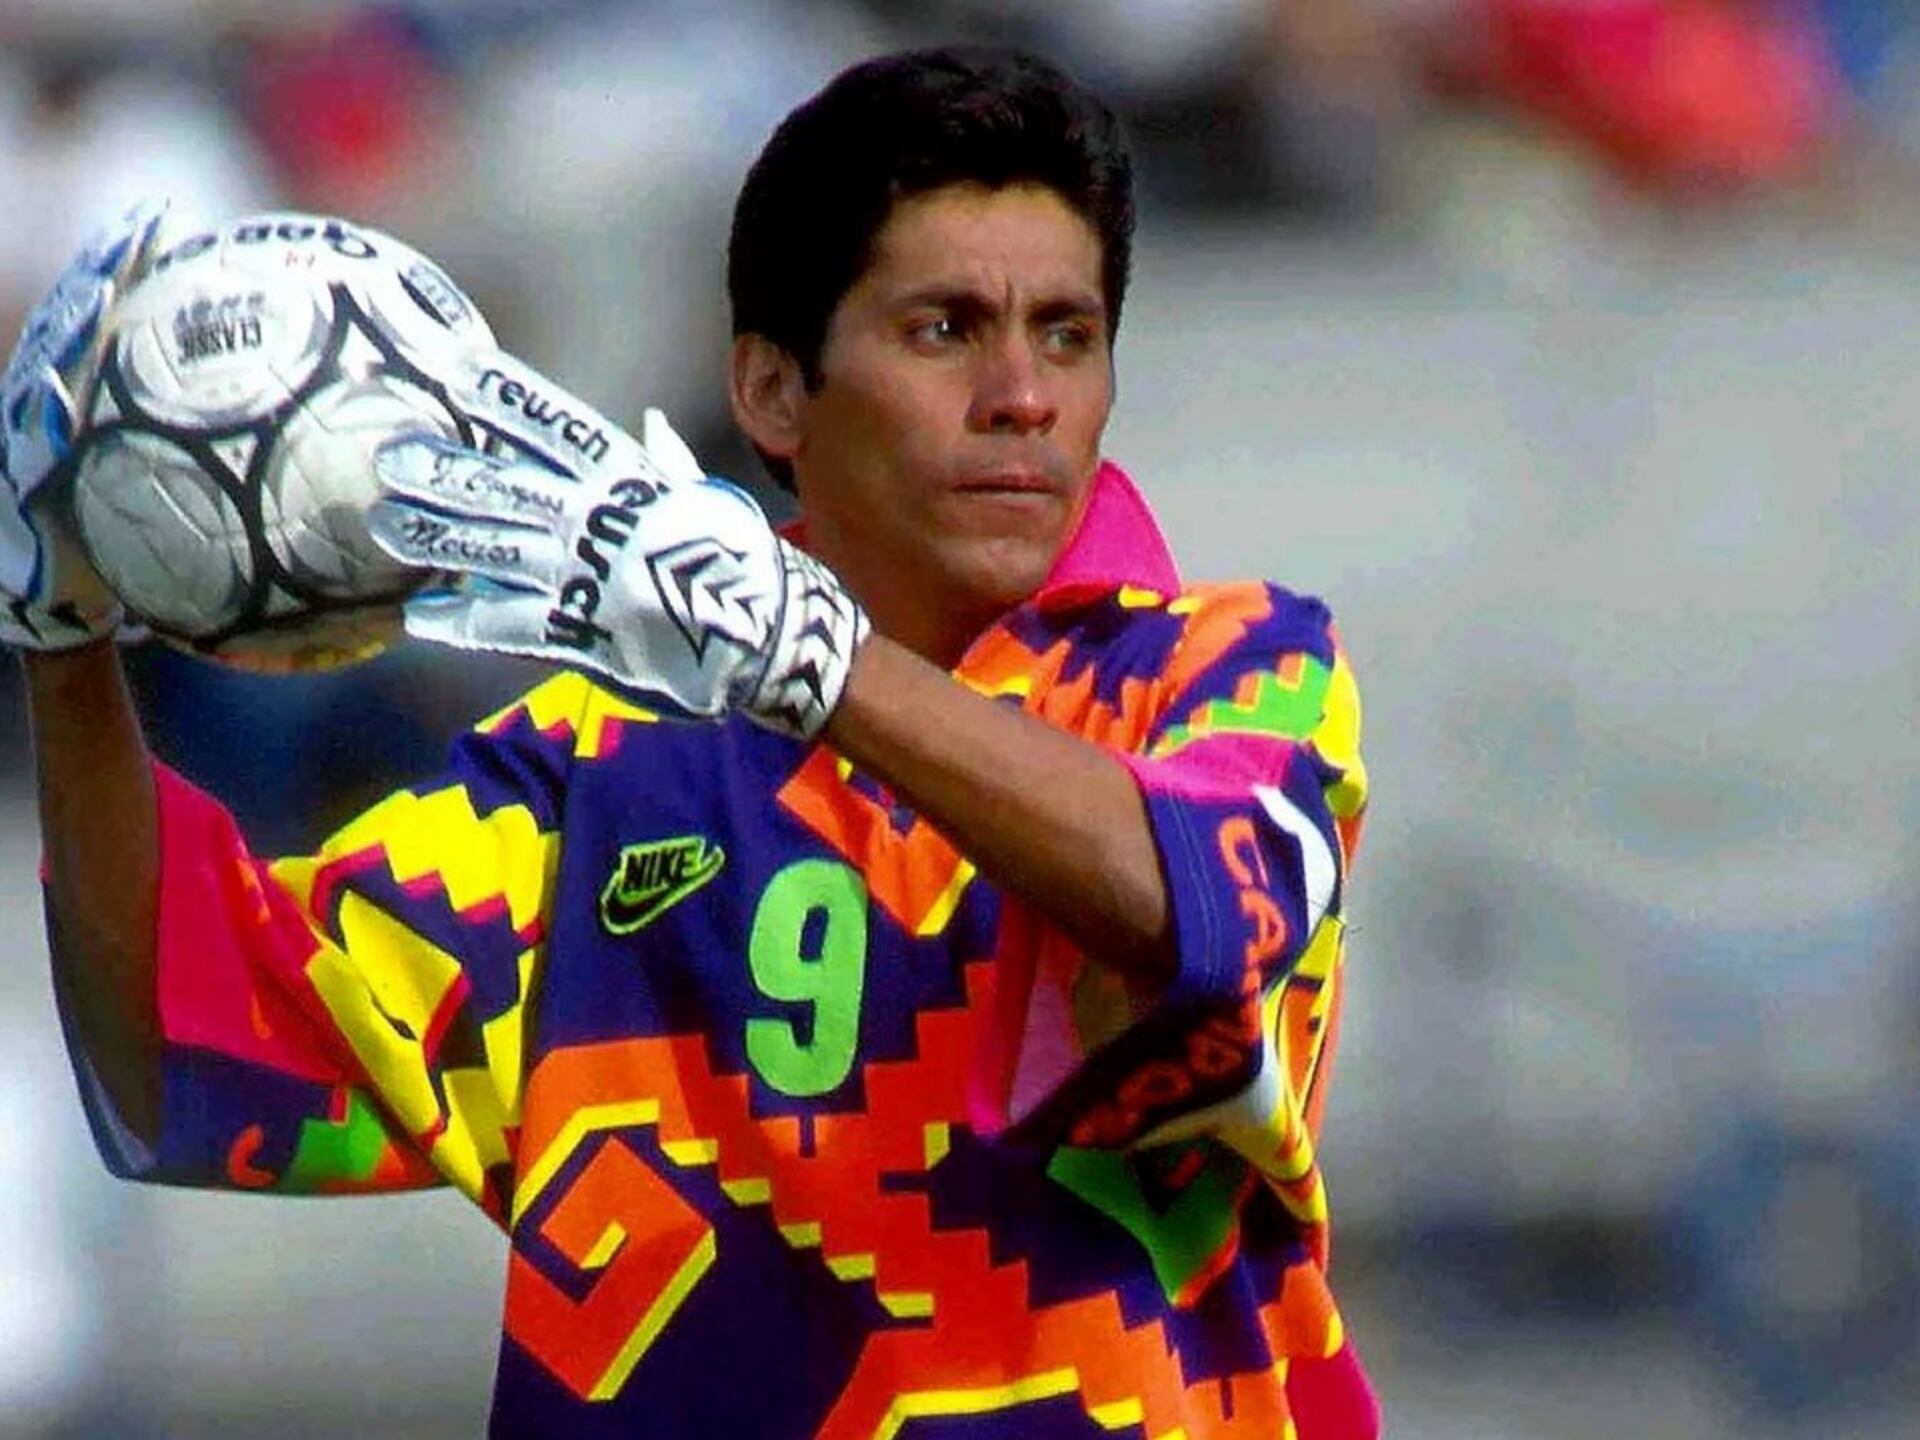 He outsmarted Jorge Campos on the pitch but now is a dishwasher